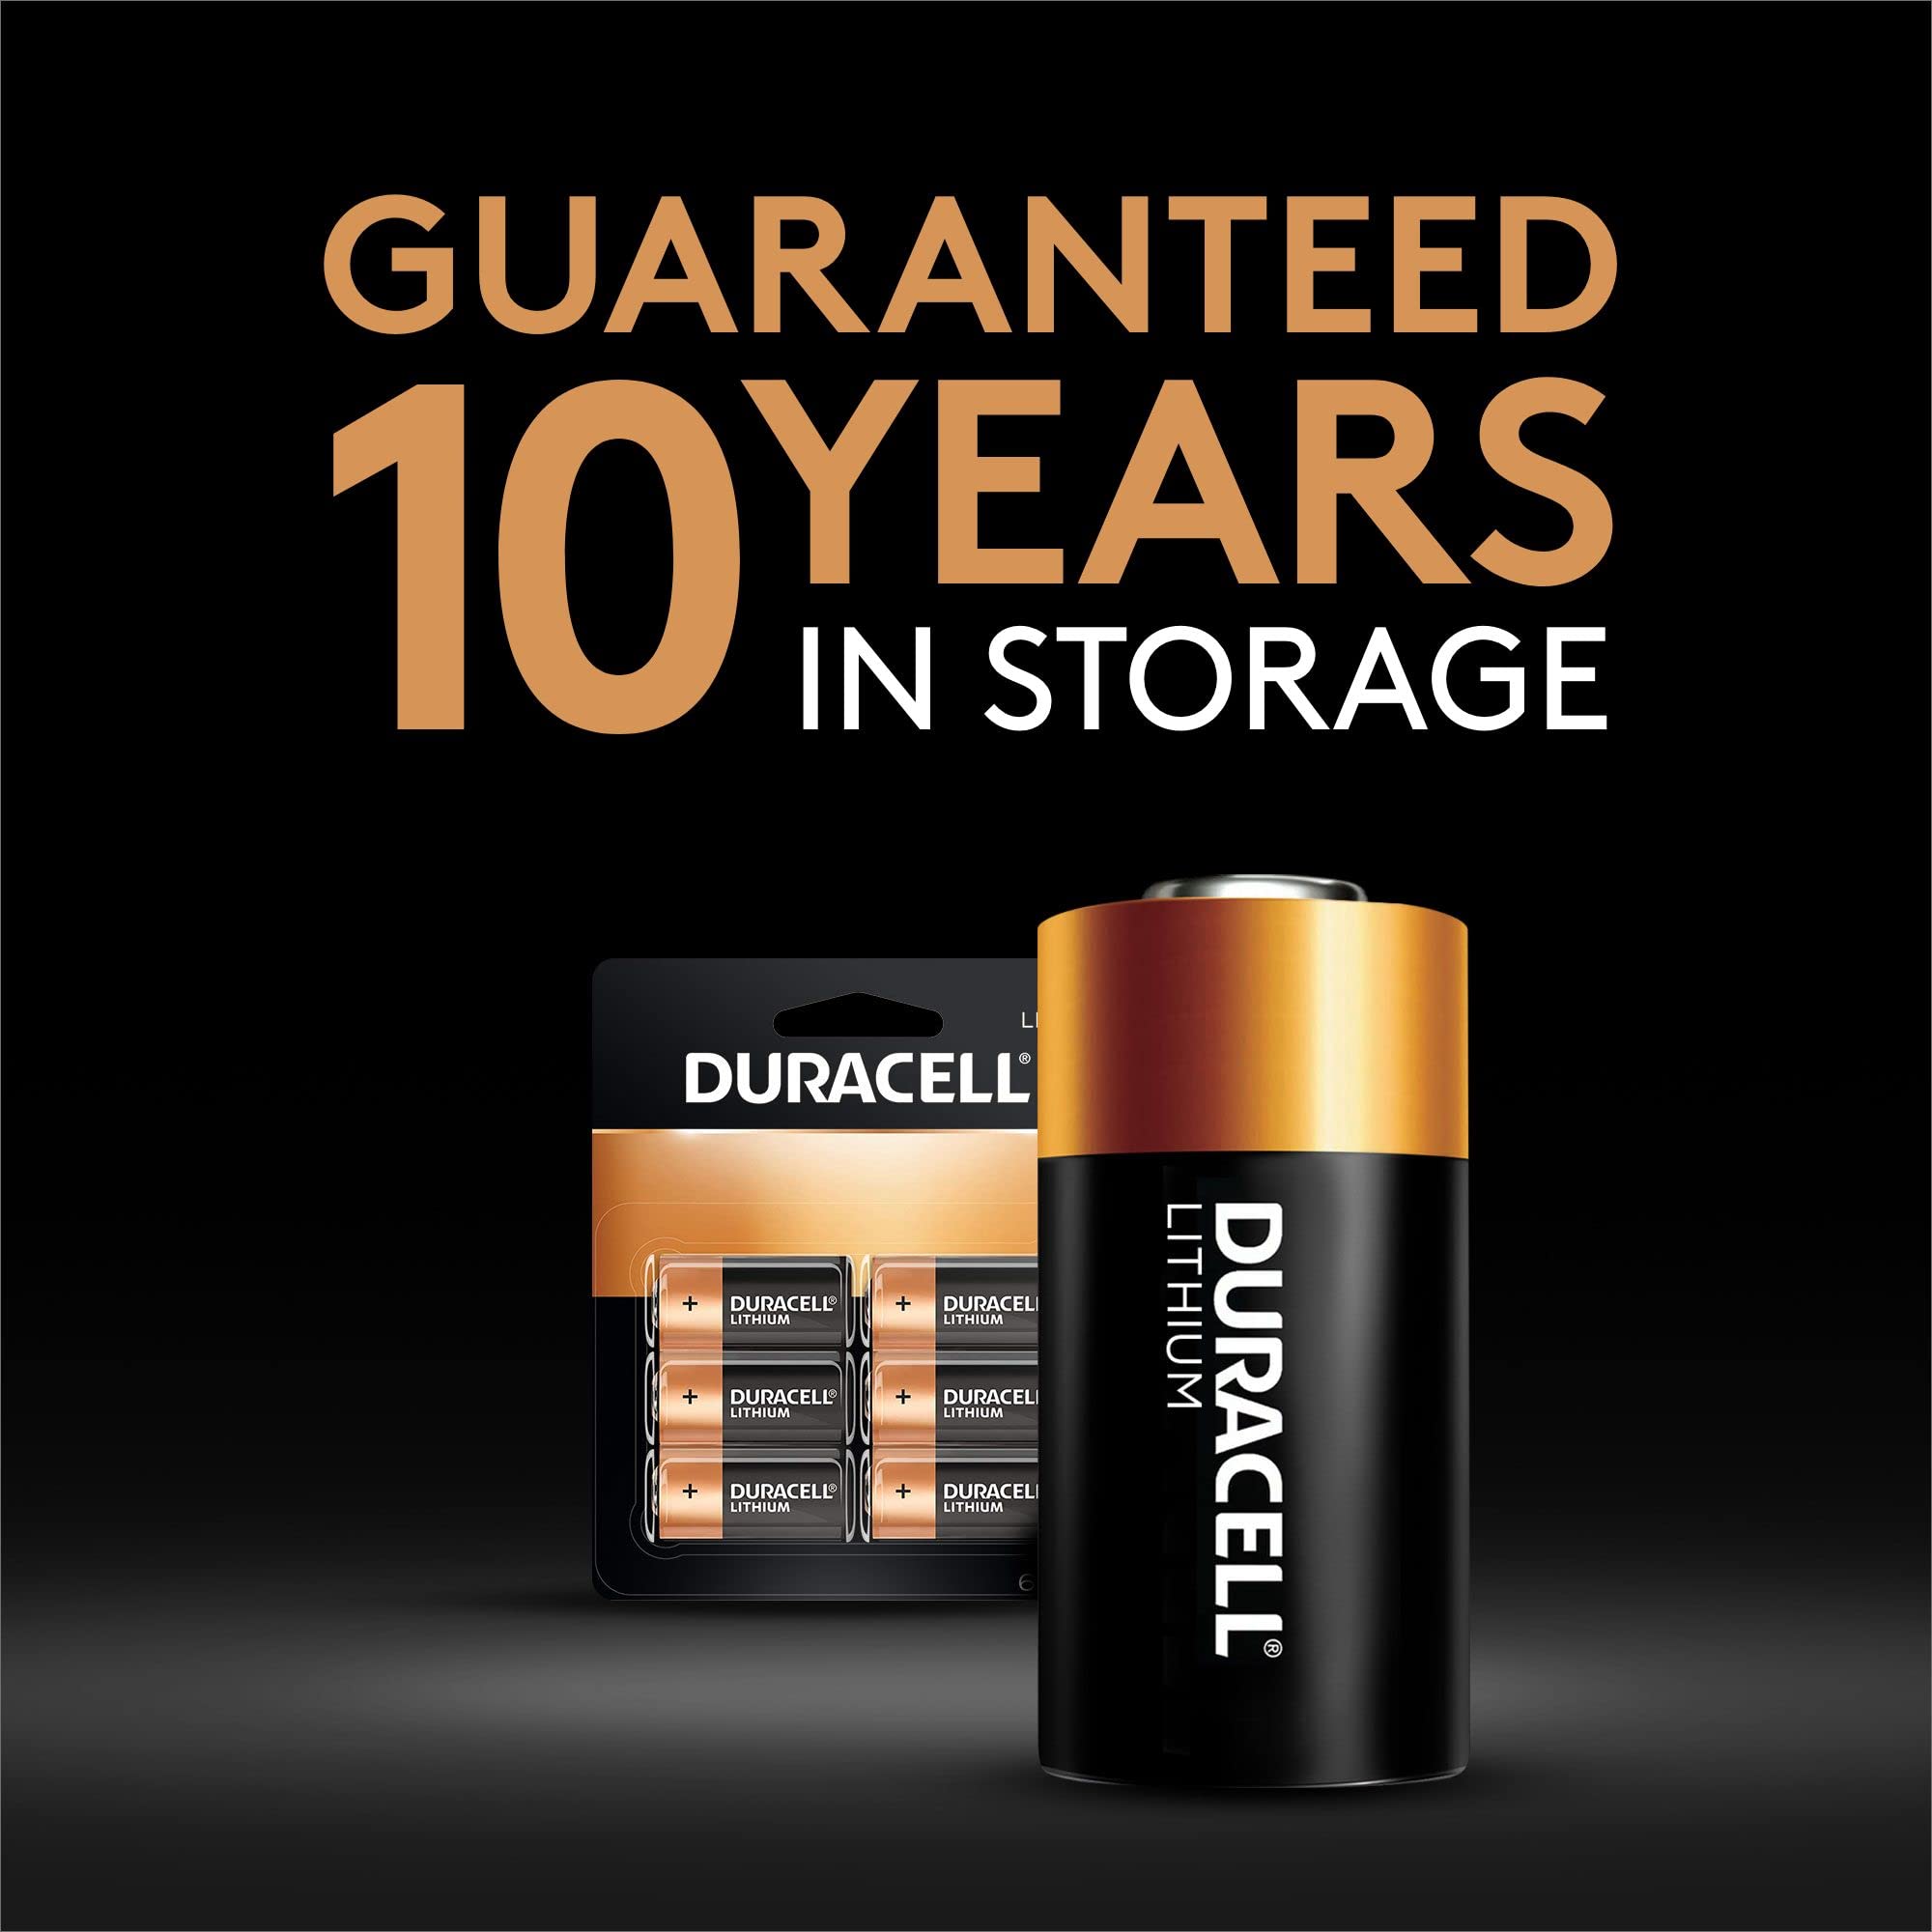 Duracell CR123A 3V Lithium Battery, 6 Count Pack, 123 3 Volt High Power Lithium Battery, Long-Lasting for Home Safety and Security Devices, High-Intensity Flashlights, and Home Automation